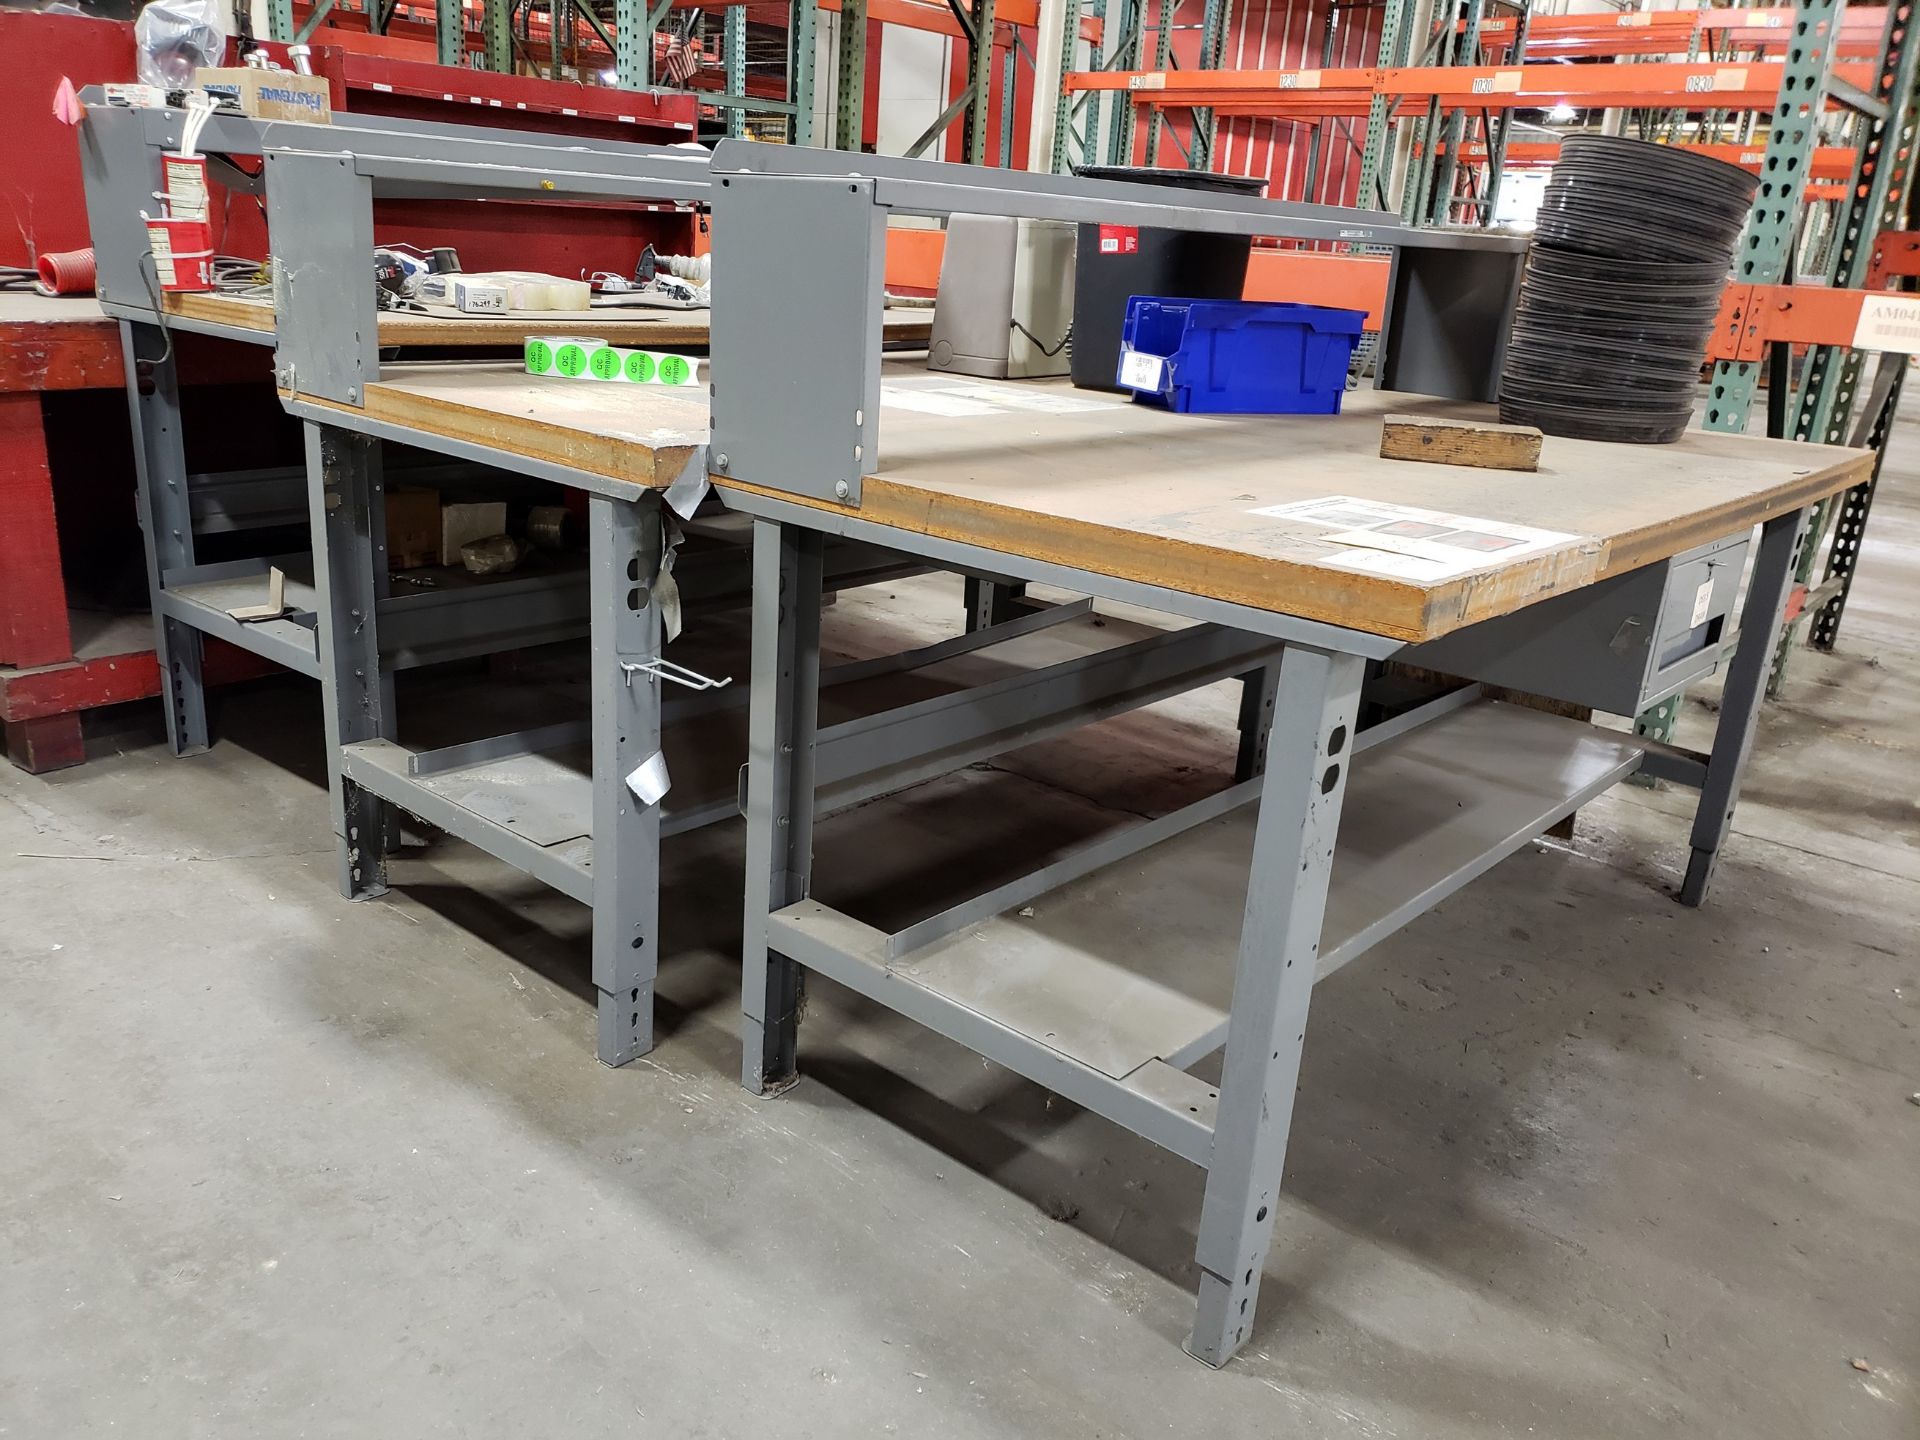 (3) WOOD TOP WORKBENCHES 36'' X 34'' X 6'; (1) HAS POWER OUTLETS - Image 9 of 9